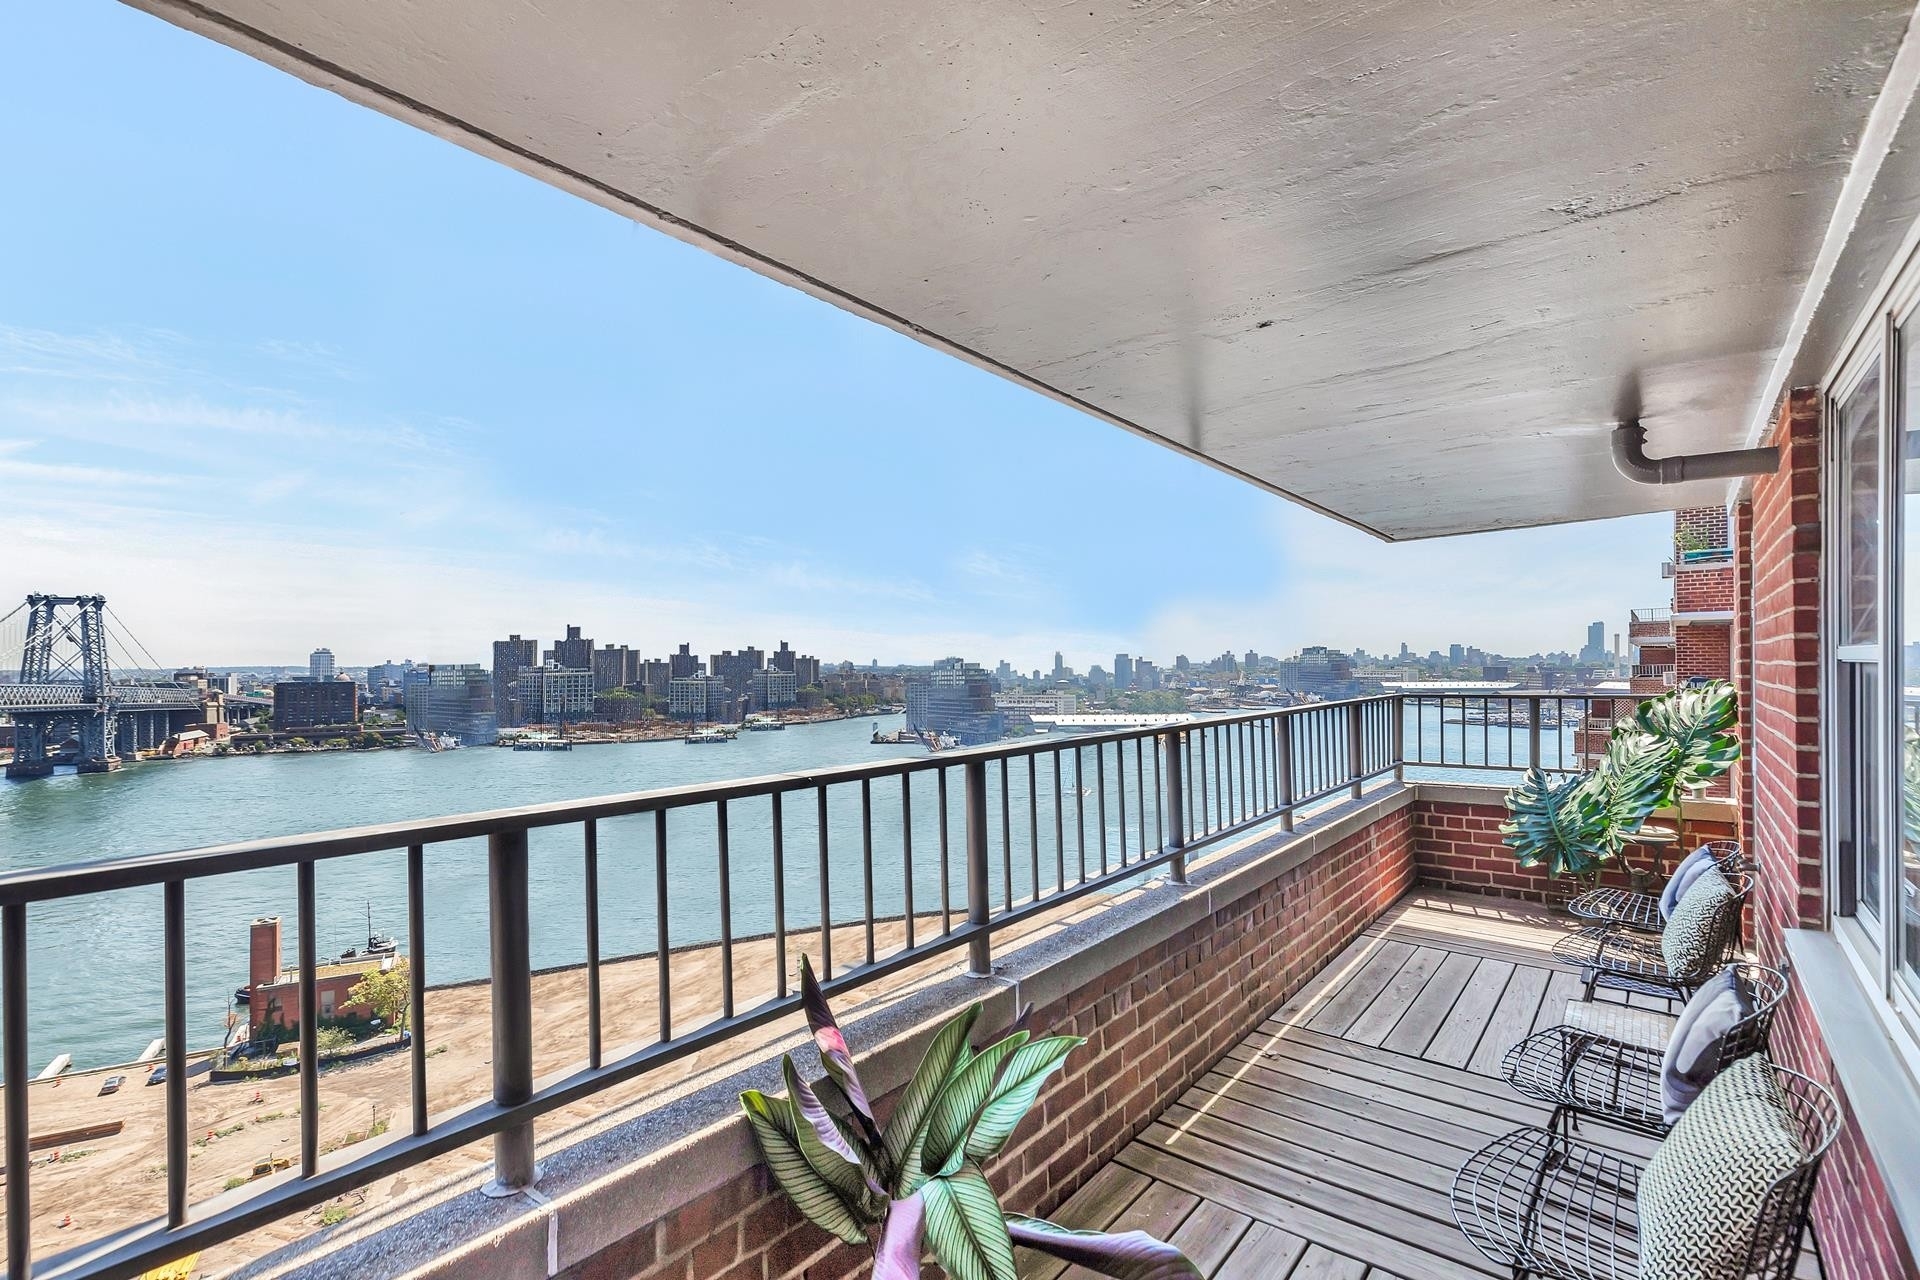 2. Co-op Properties for Sale at 457 FDR DR, A2002/2003 Lower East Side, New York, NY 10002